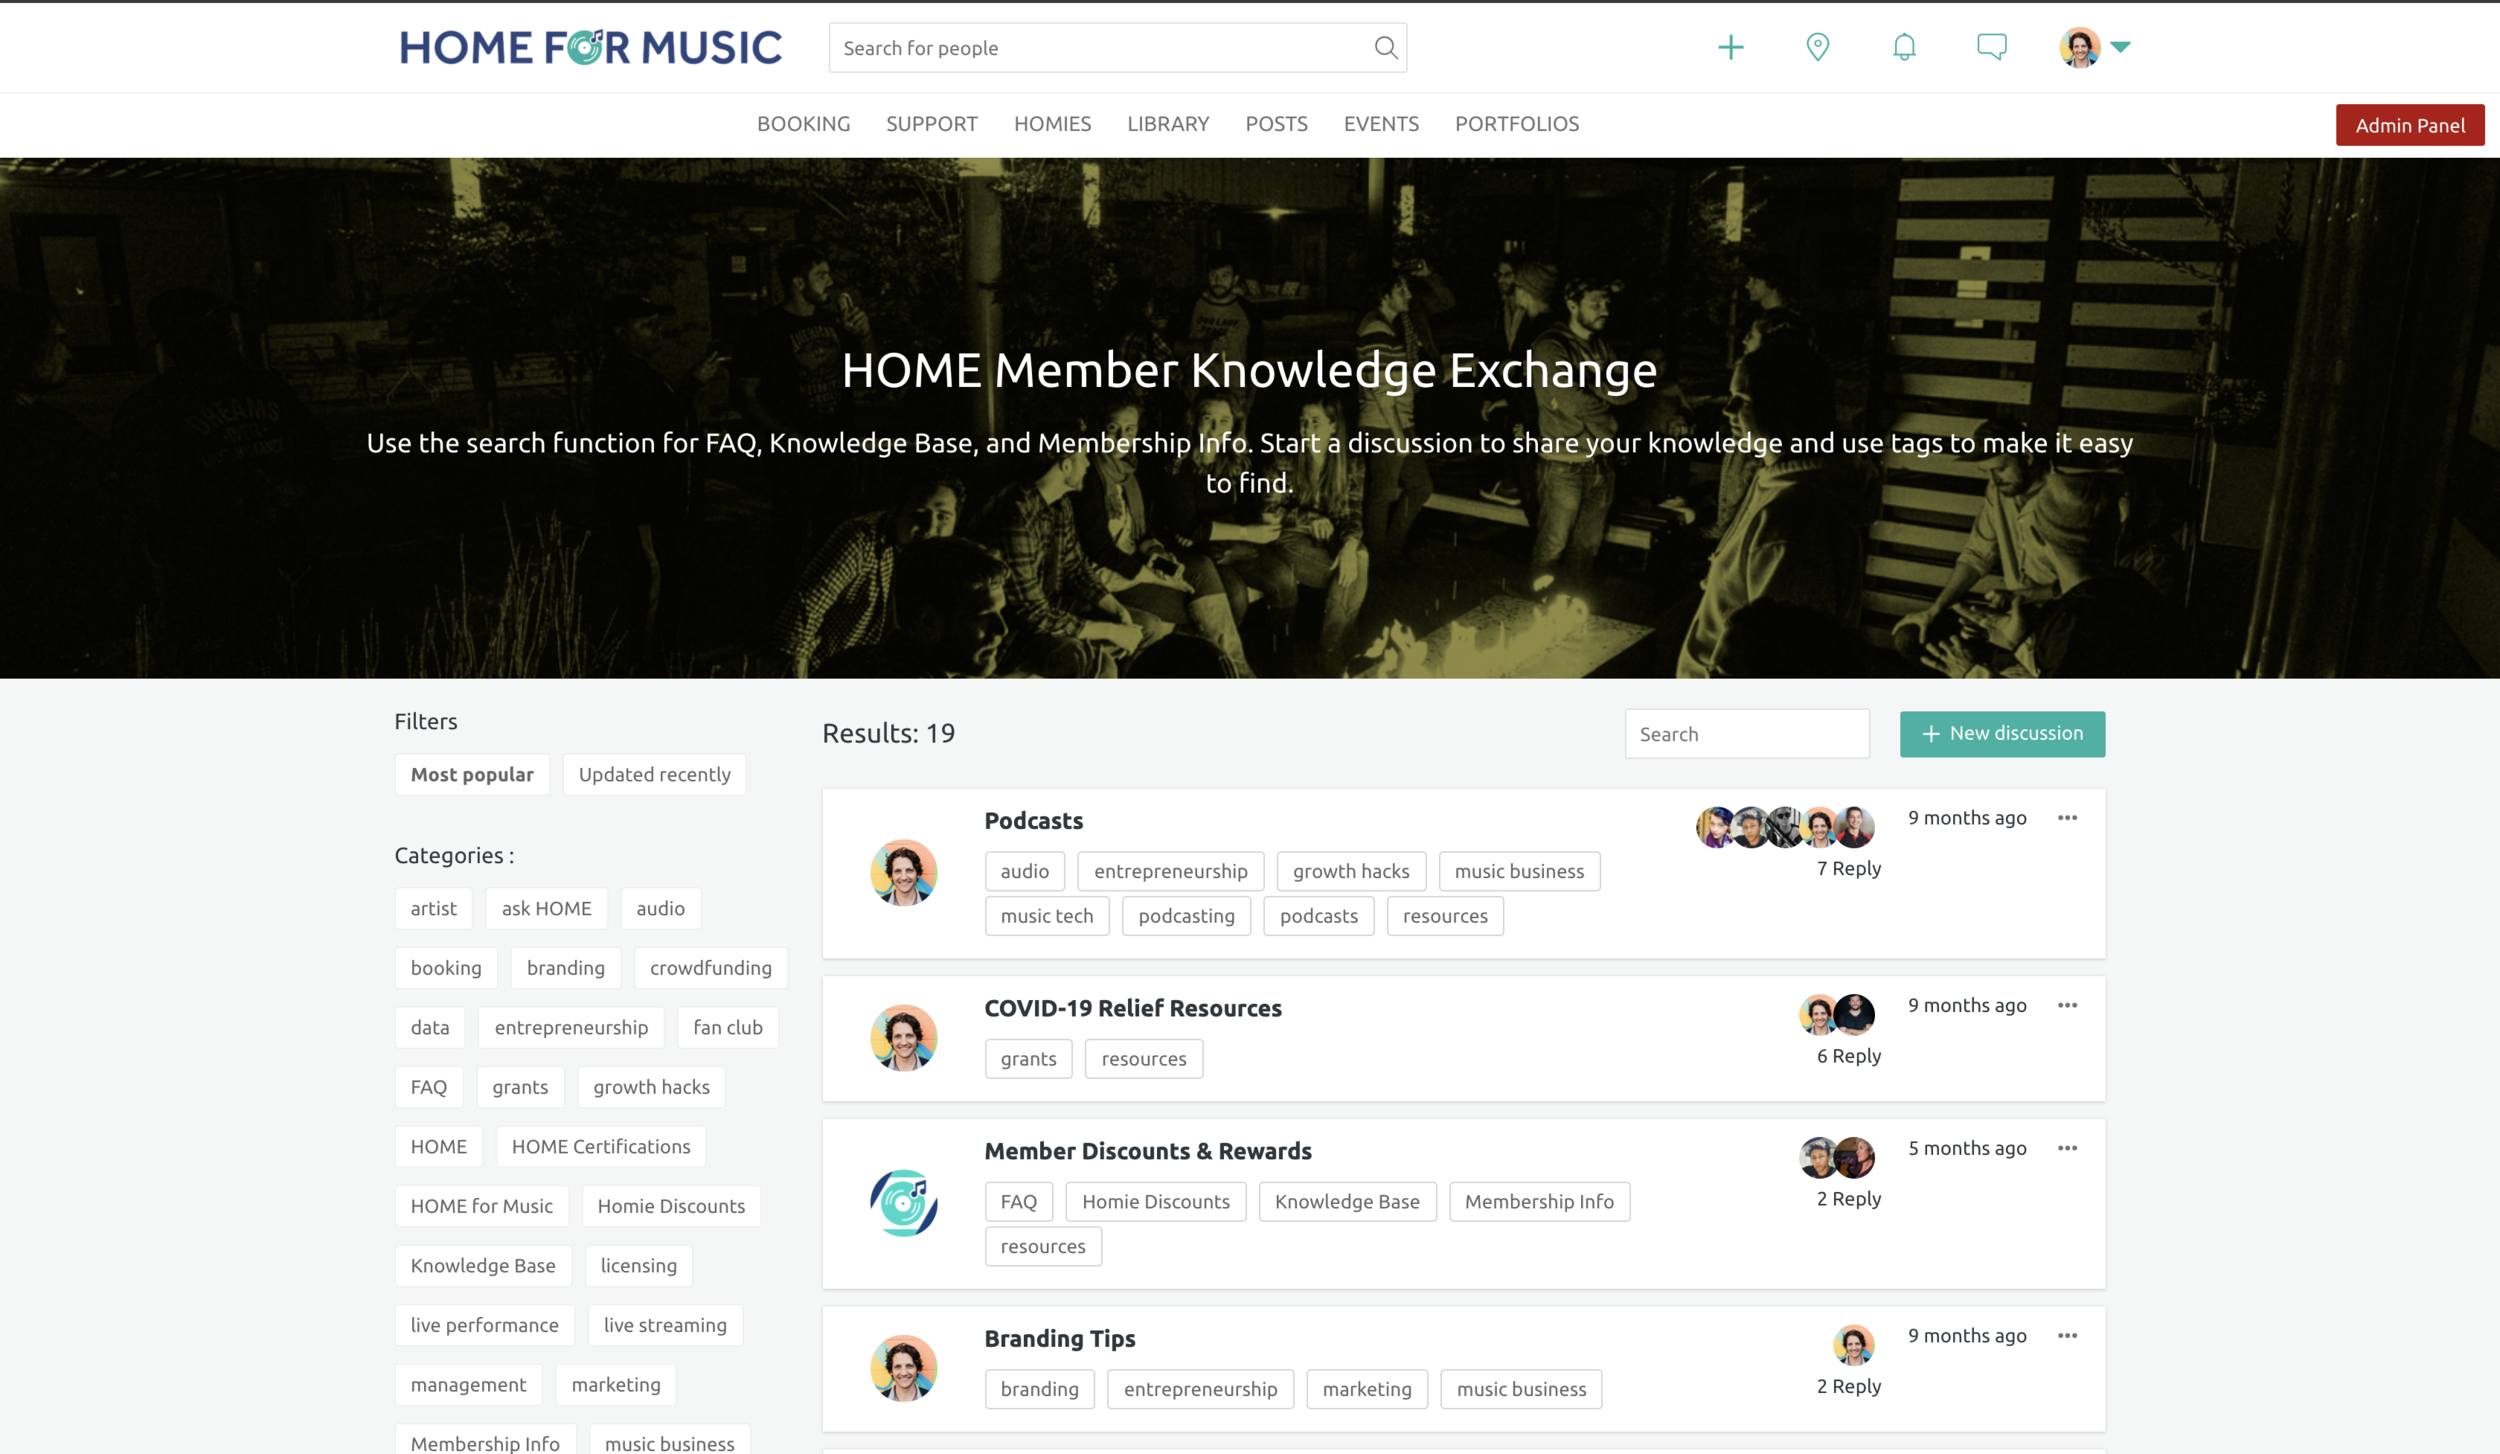 home-for-music-knowledge-exchange